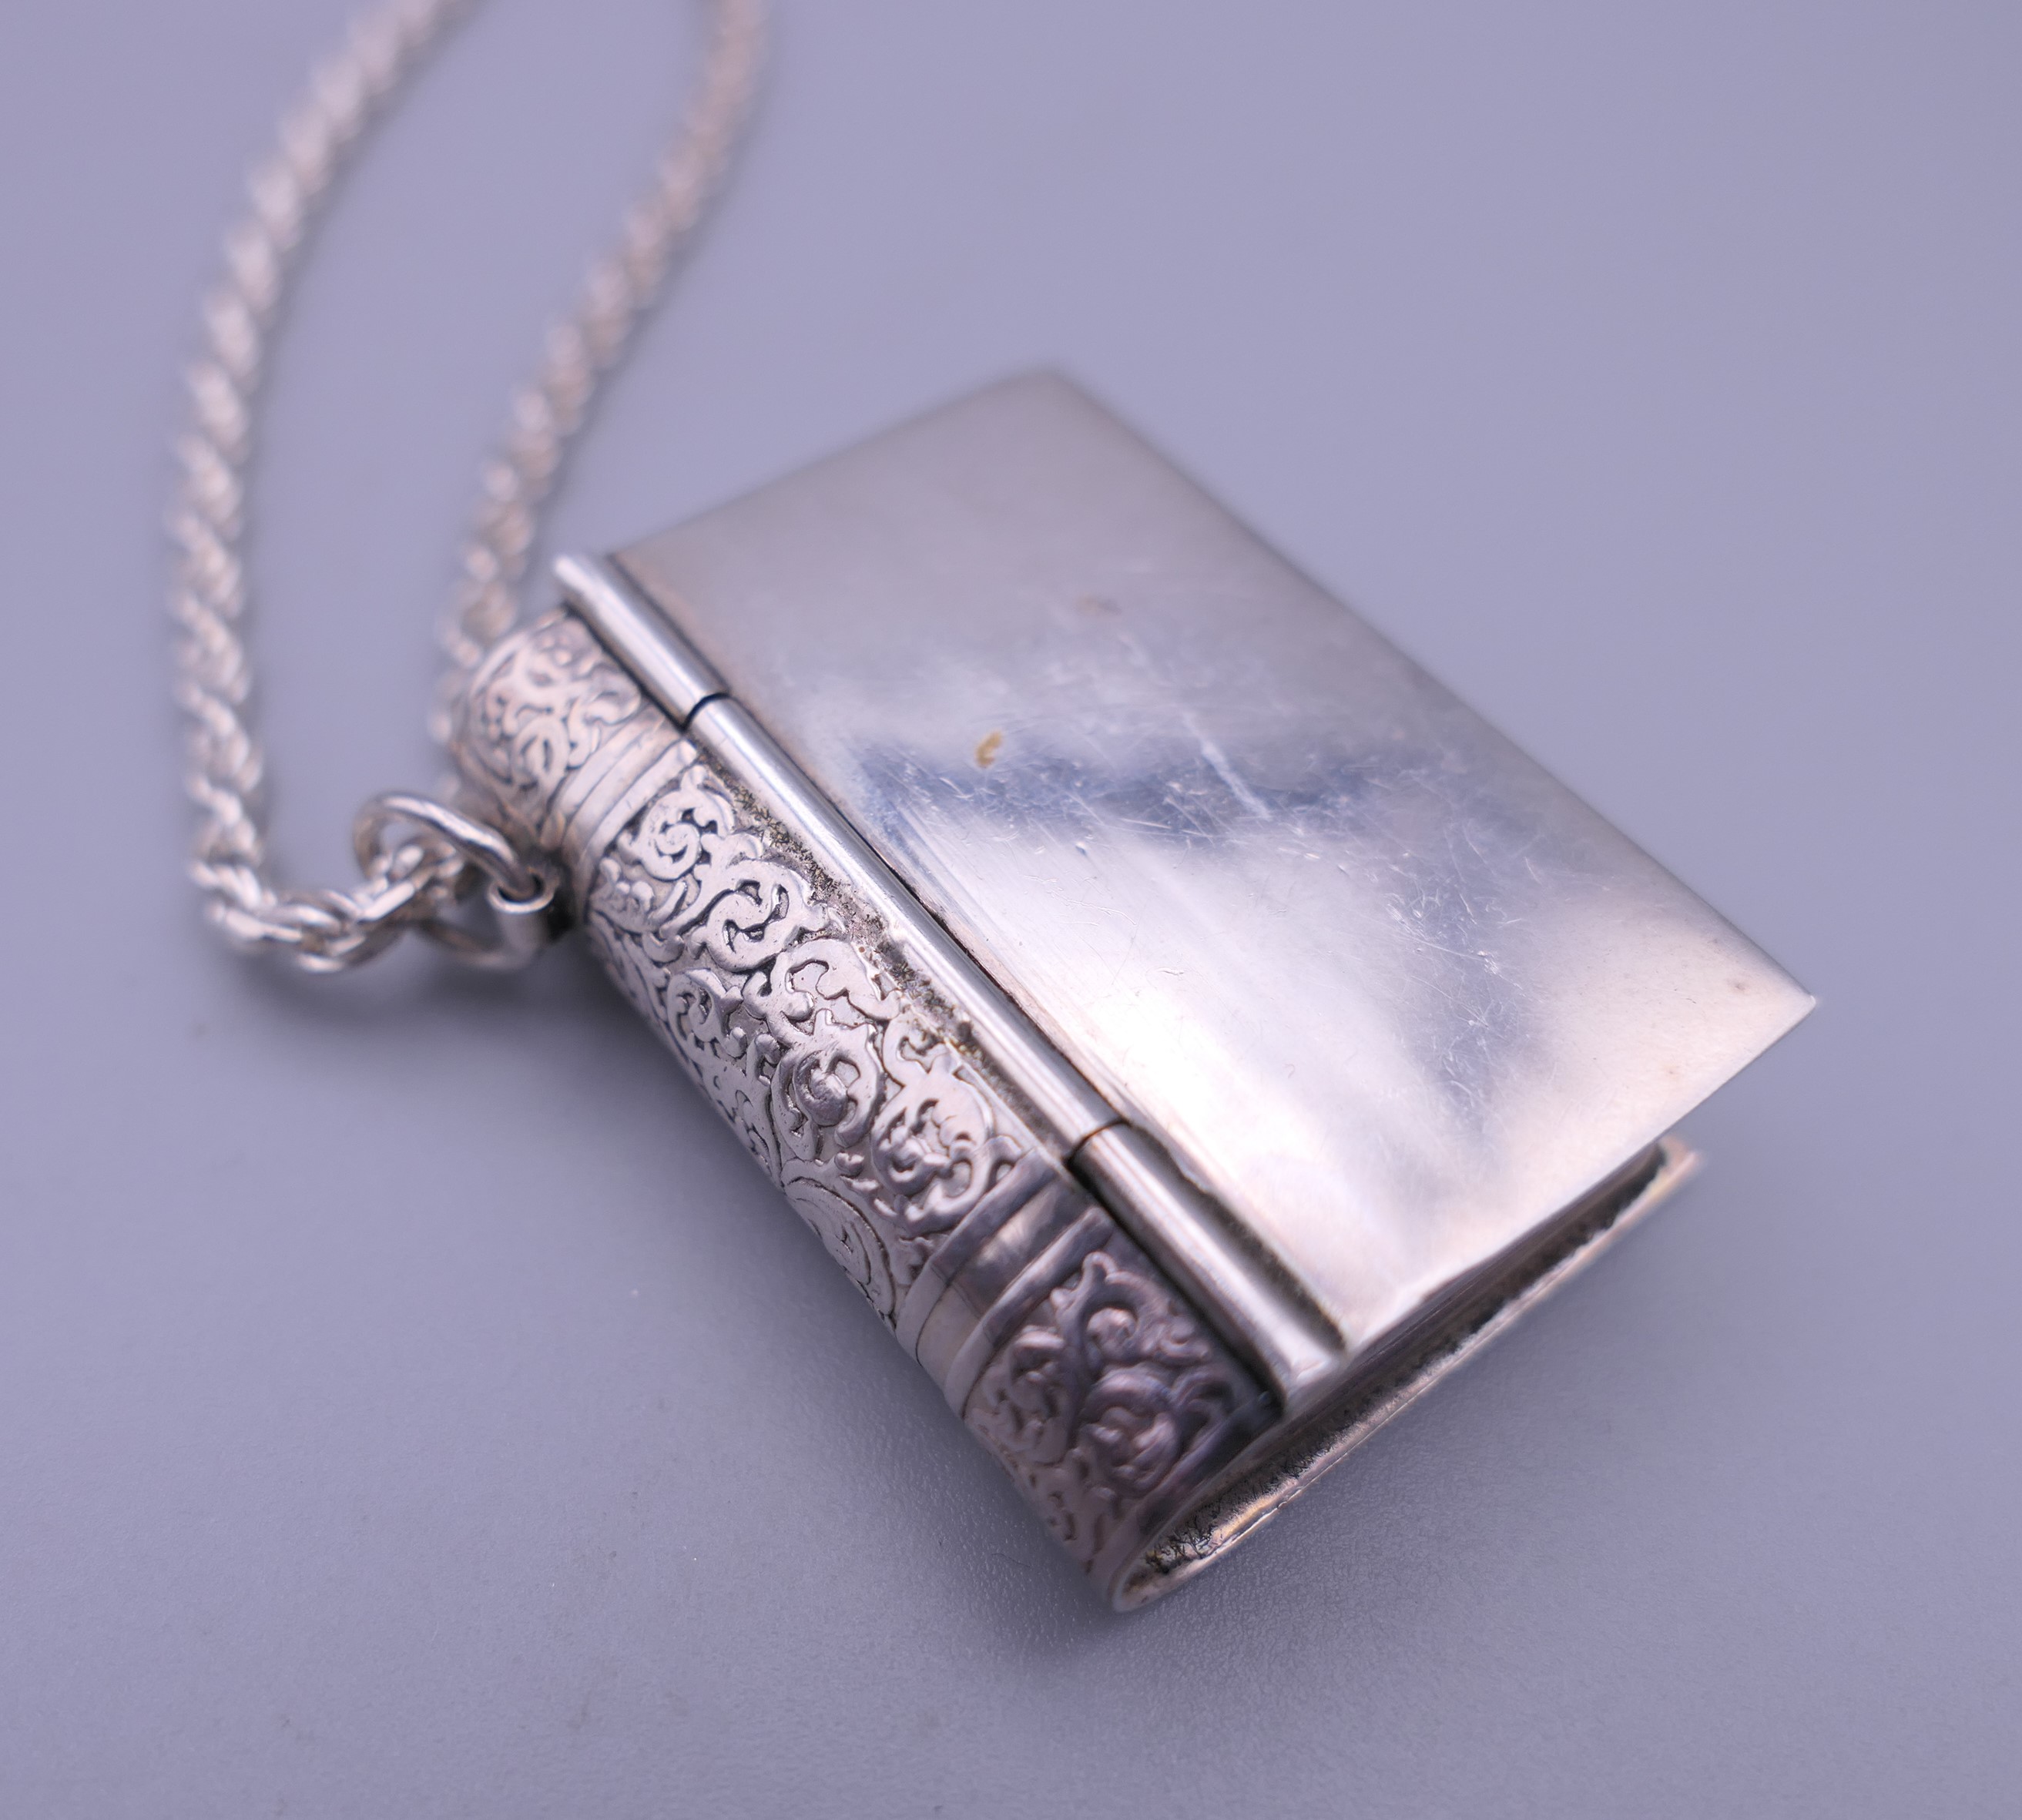 A book form pendant on chain. The pendant 3.5 cm high. - Image 2 of 6